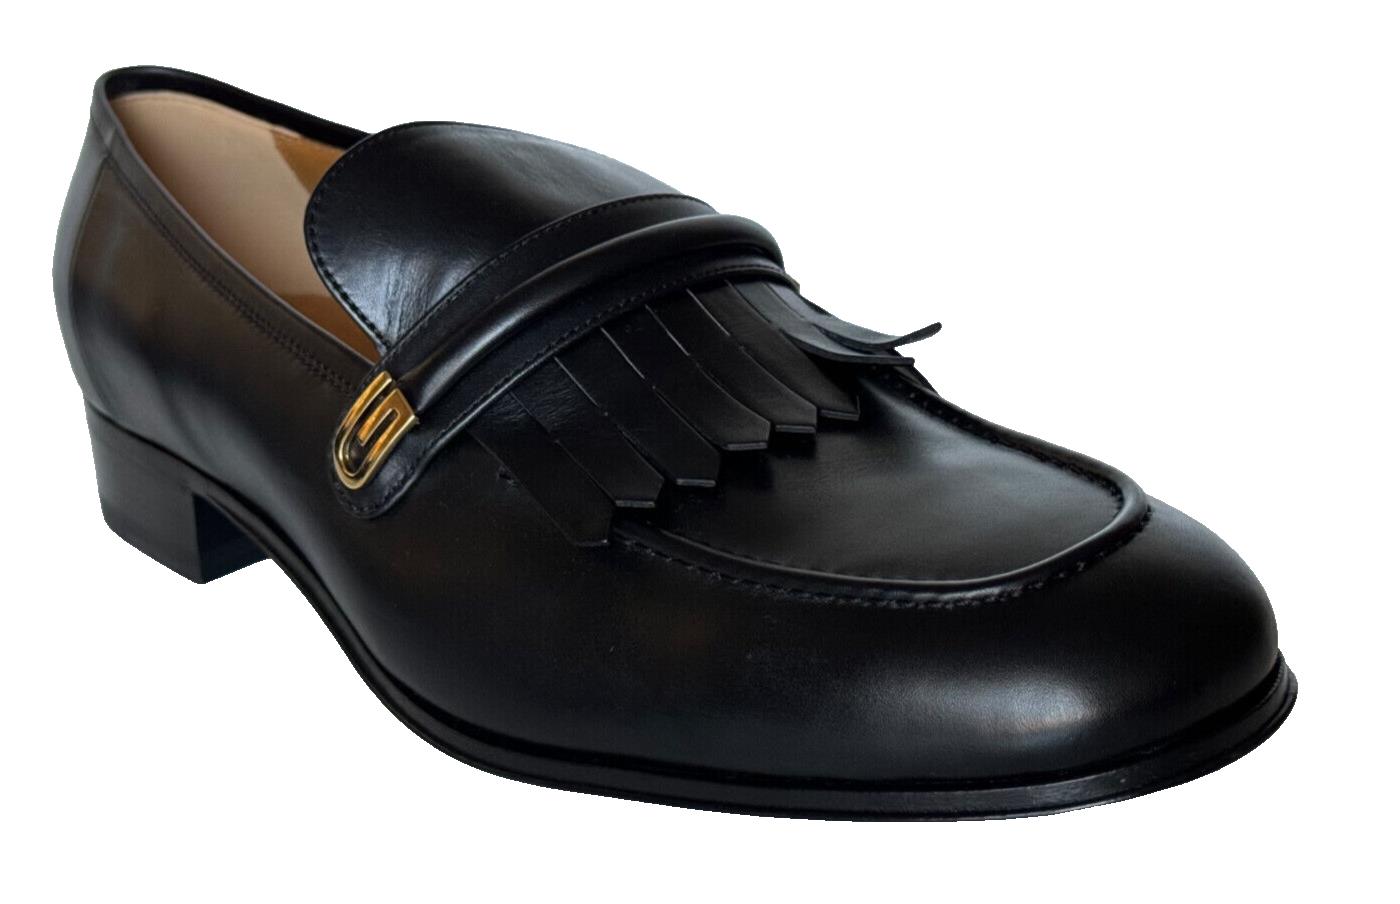 NIB Gucci Men’s Moccasin Leather Dress Shoes Black 14 US (13 Gucci) 714680 Italy